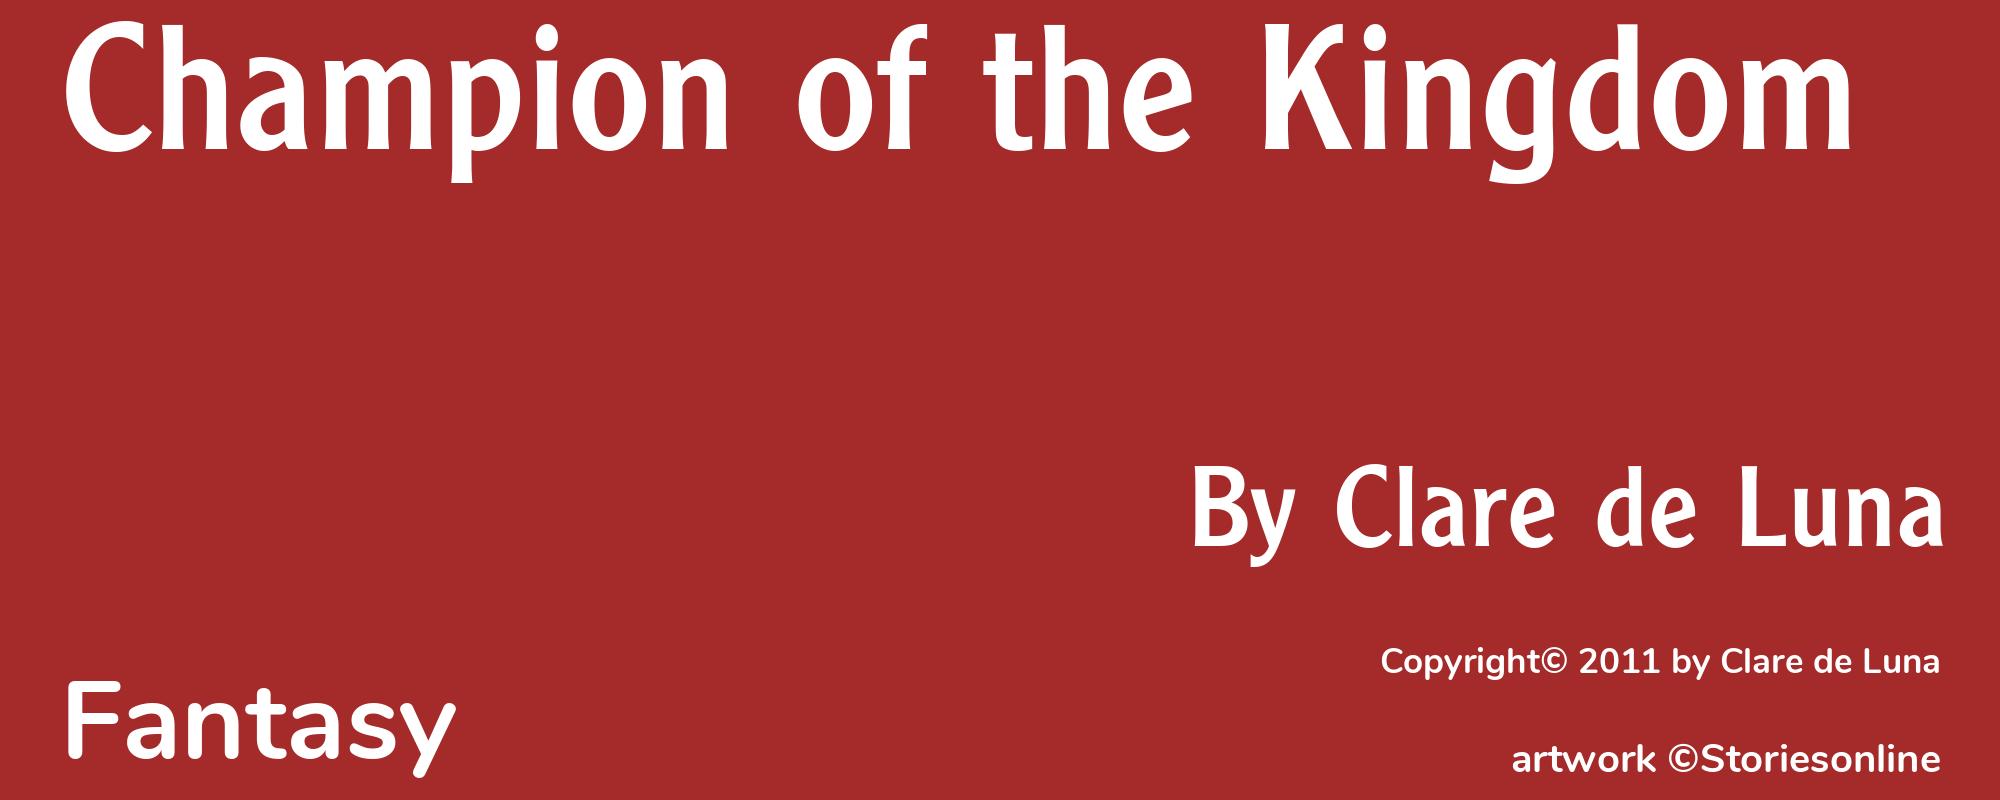 Champion of the Kingdom - Cover